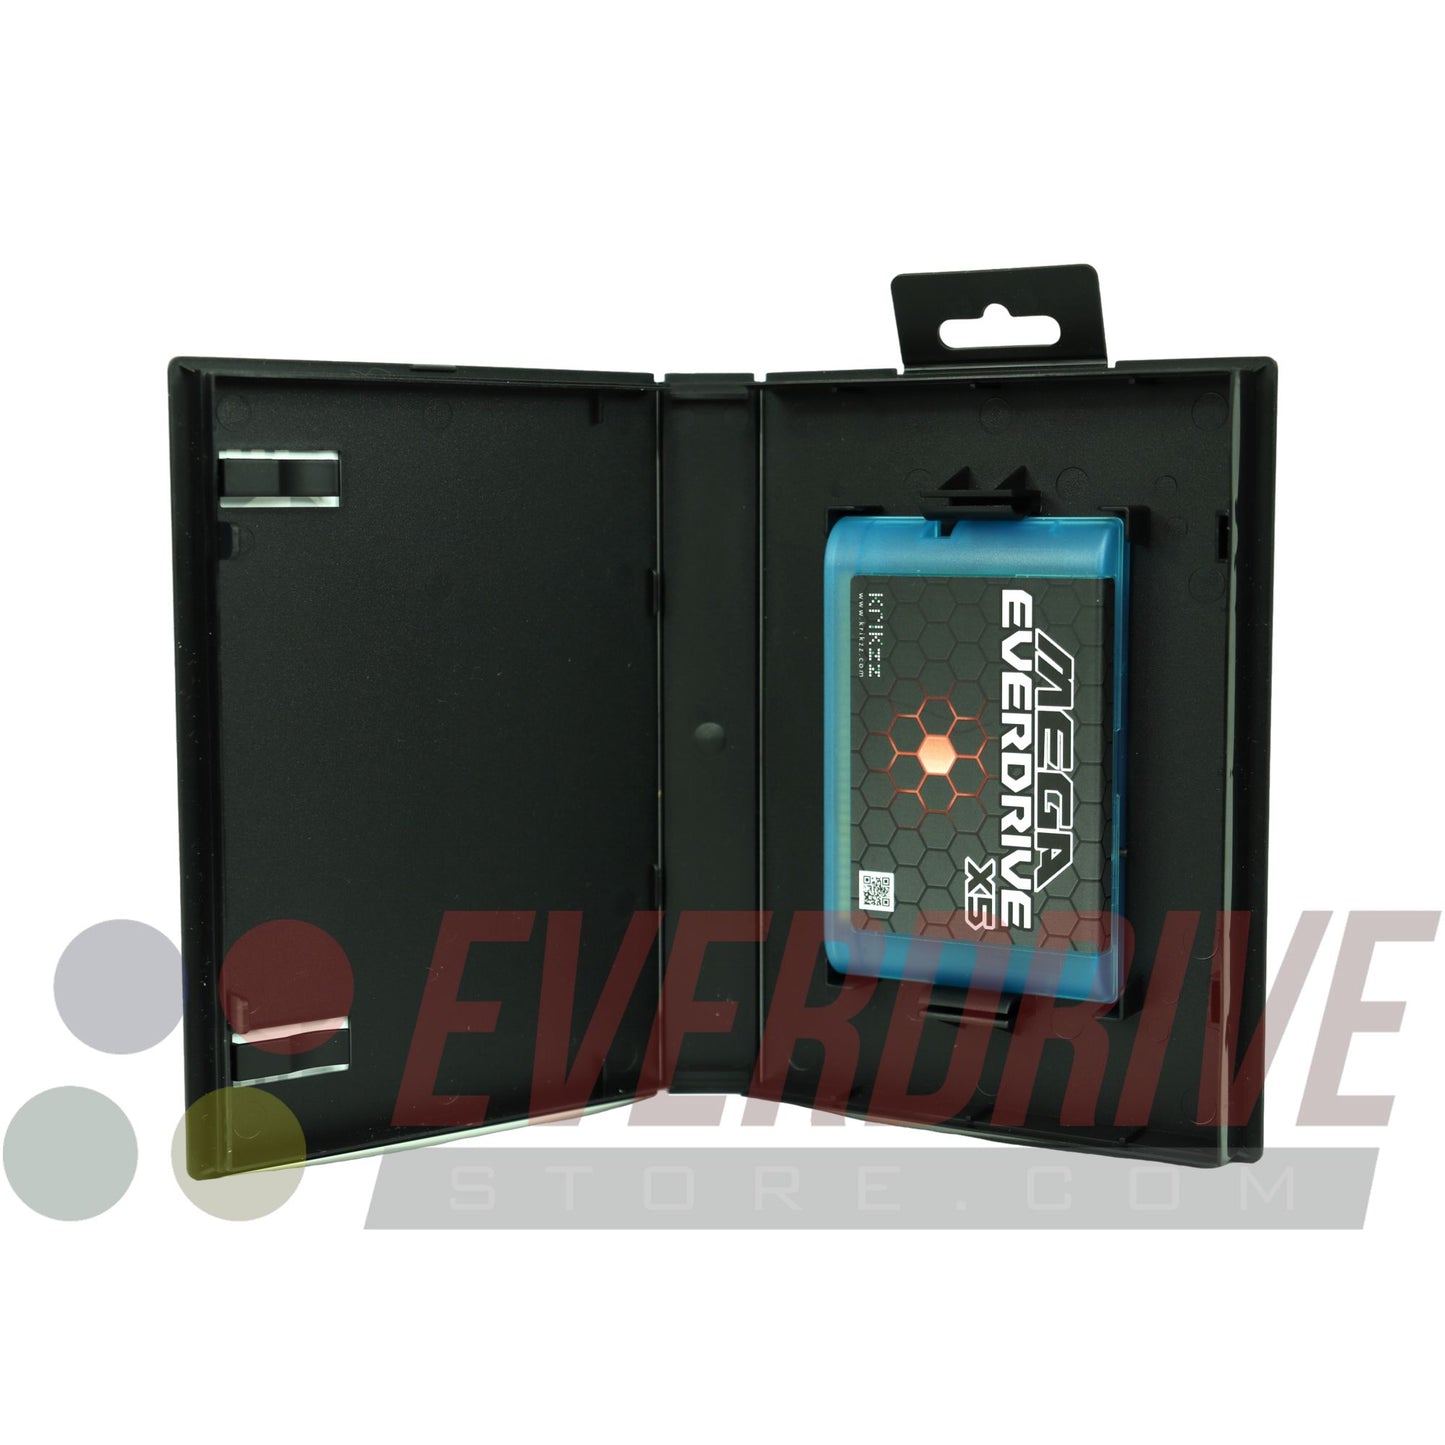 Mega Everdrive X5 - Frosted Turquoise